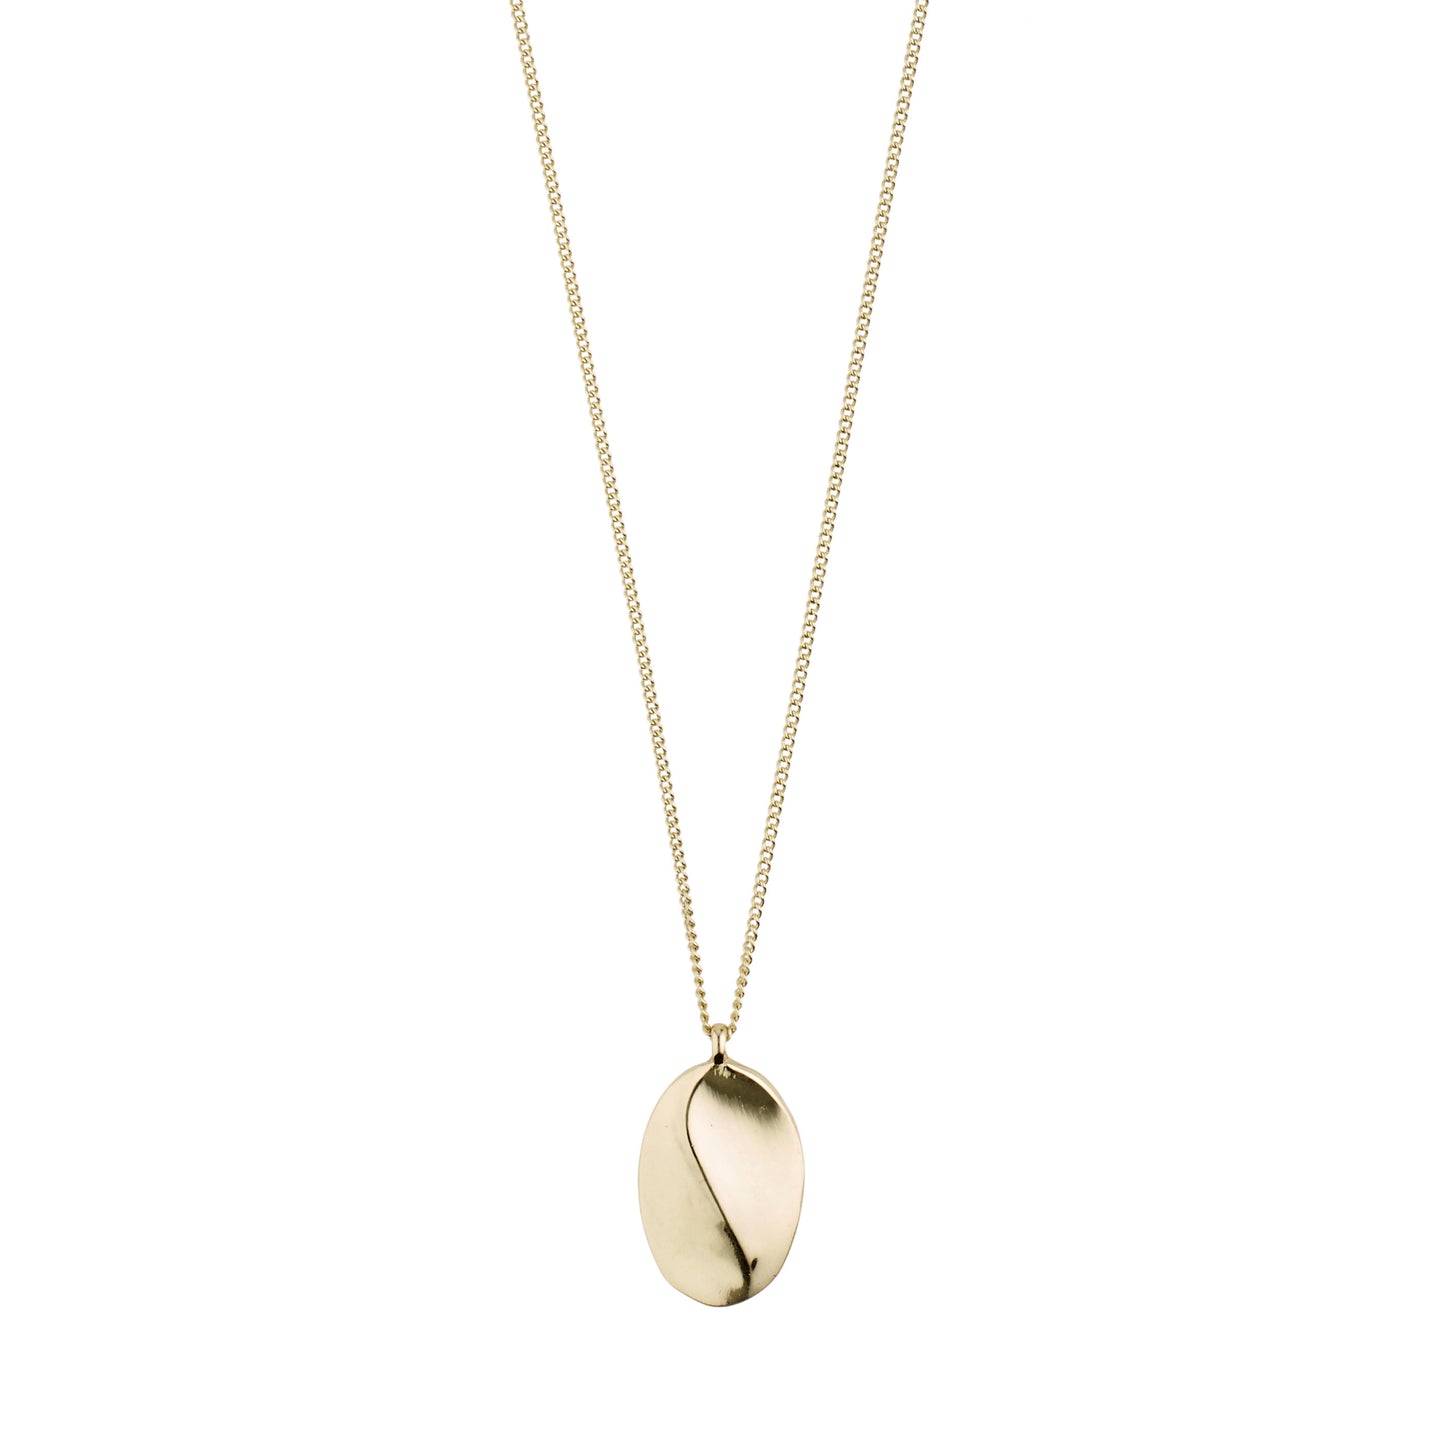 Necklace Mabelle Gold Plated Gold